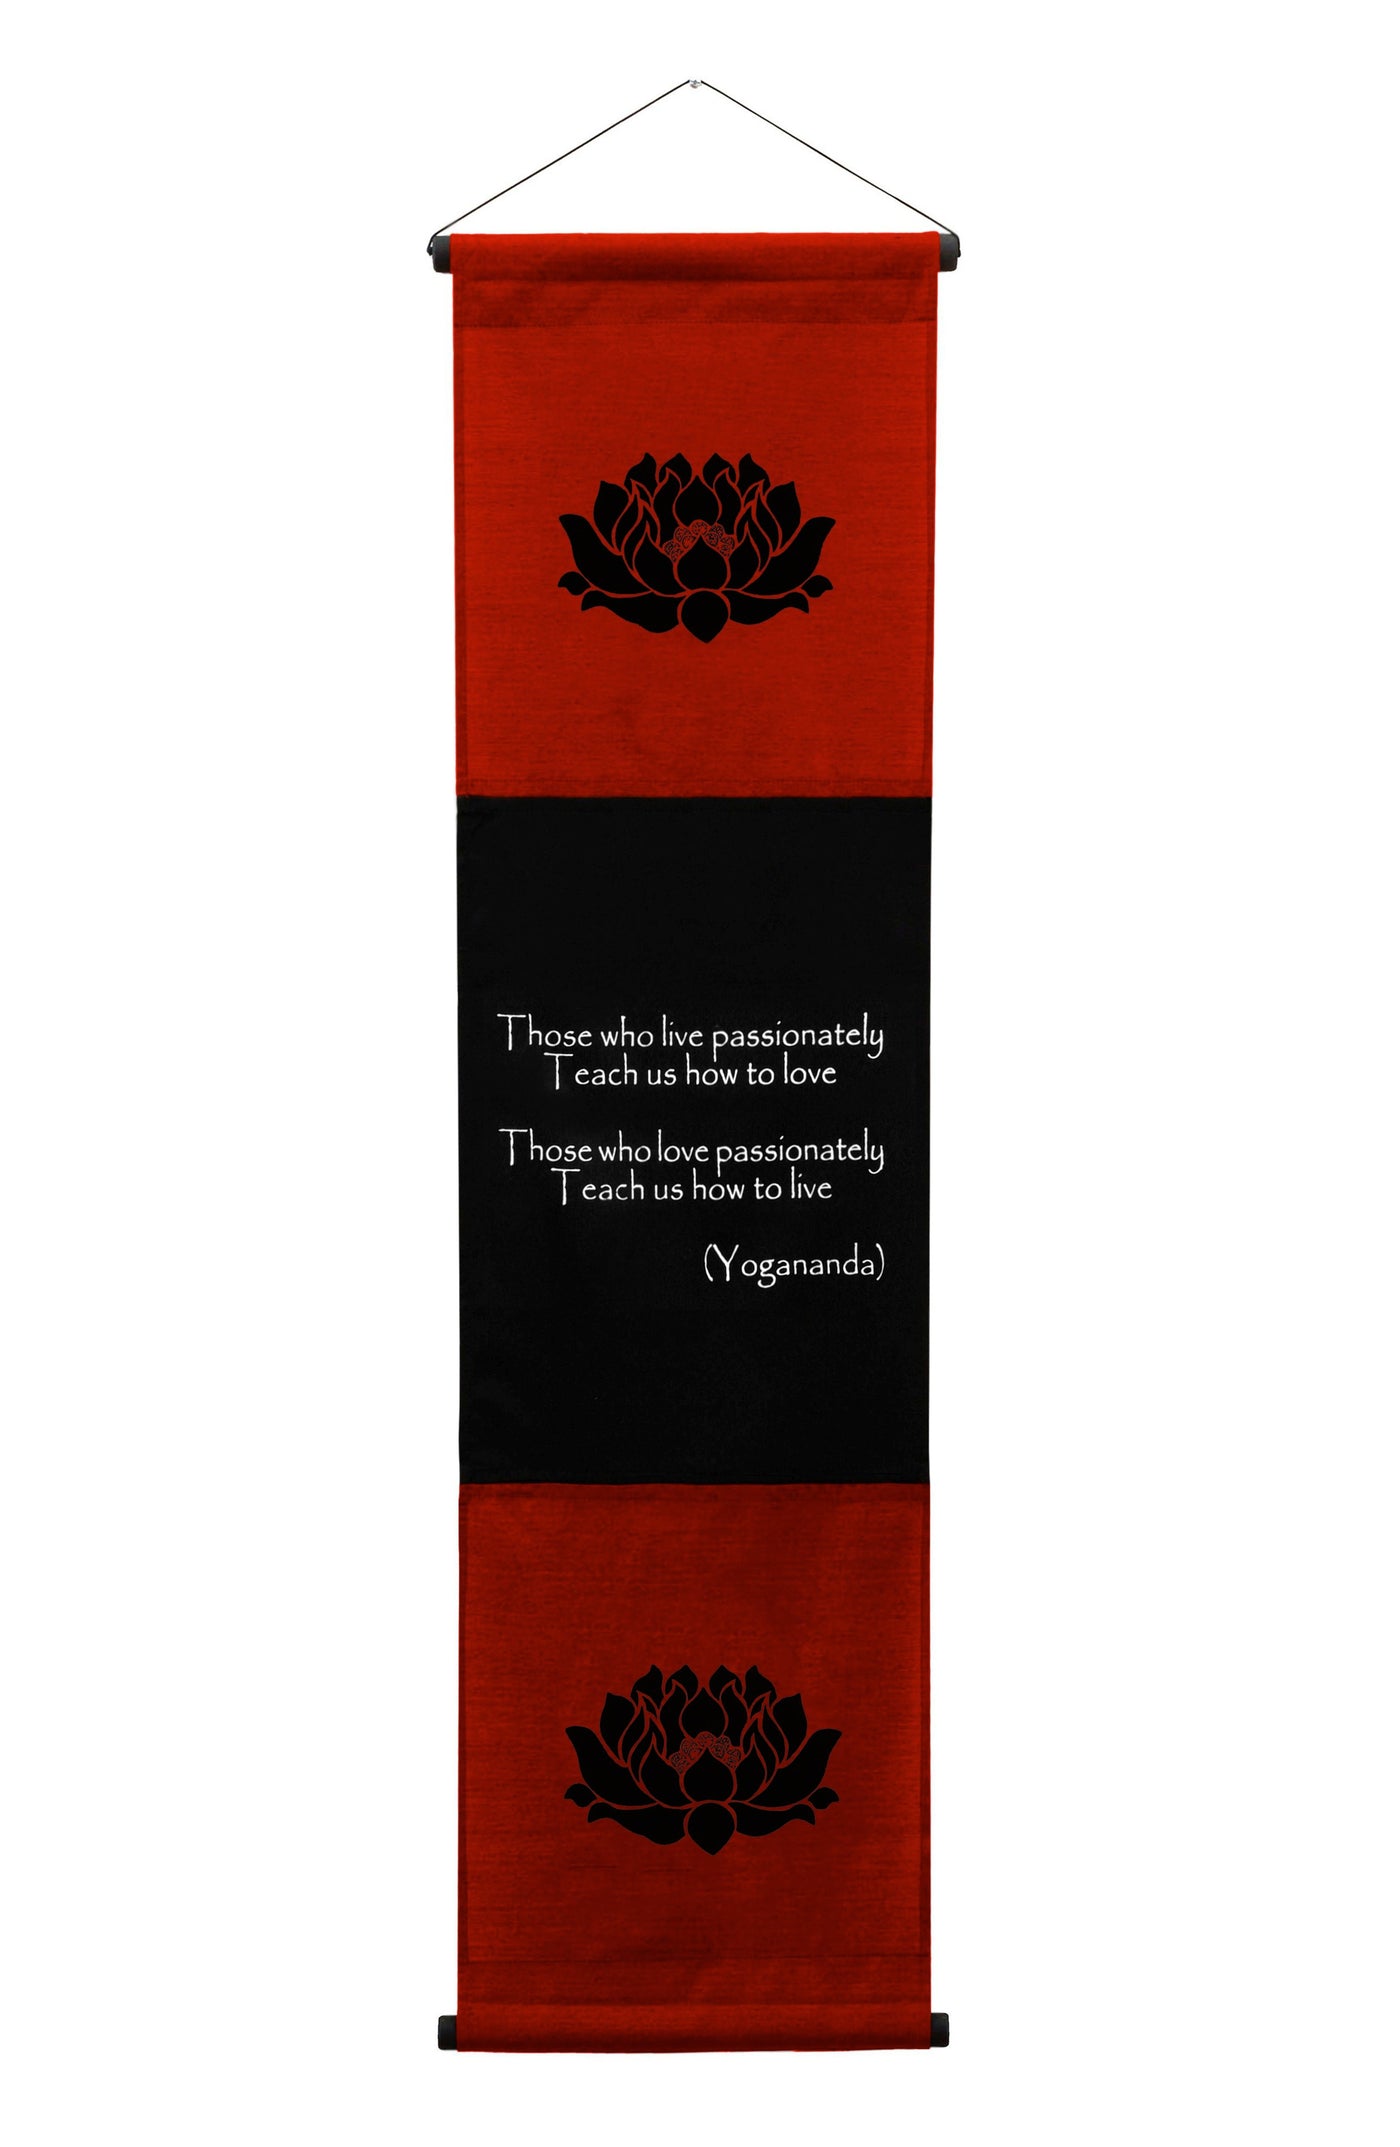 Inspirational Wall Decor Yogananda Banner Art, Inspiring Quote Hanging Scroll, Affirmation Motivational Uplifting Message, Thought Saying Tapestry